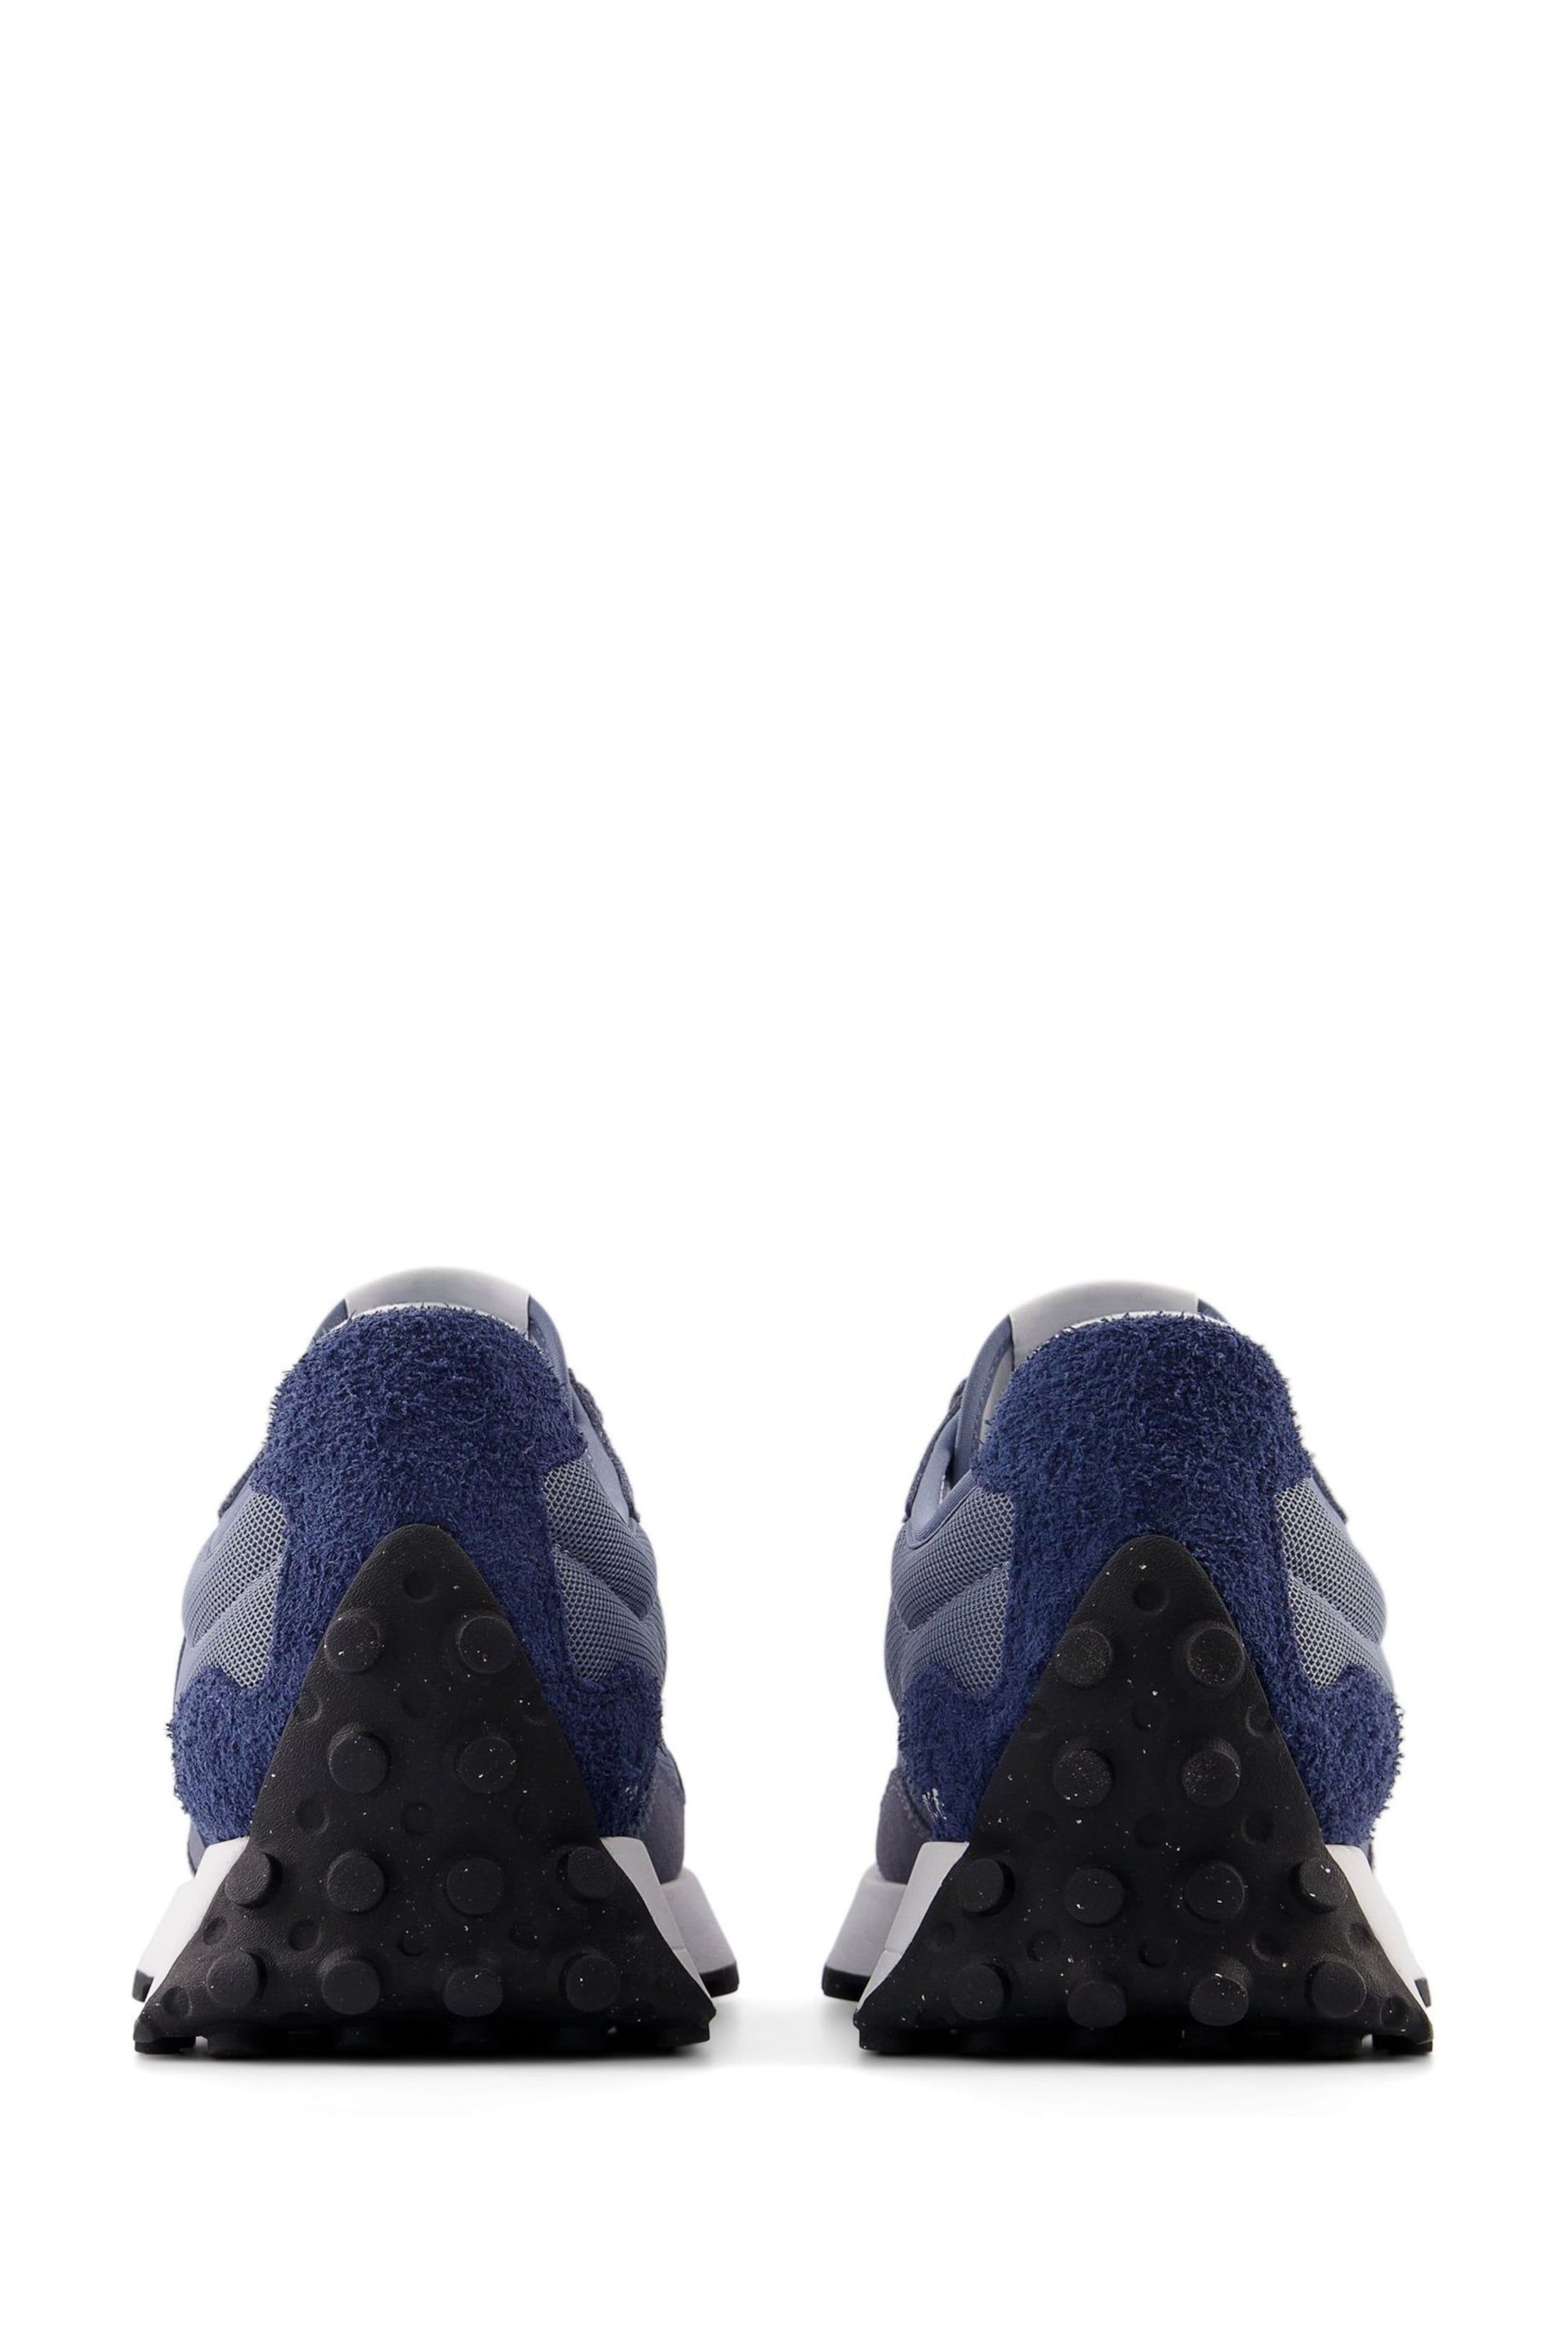 New Balance Blue Mens 327 Trainers - Image 8 of 11